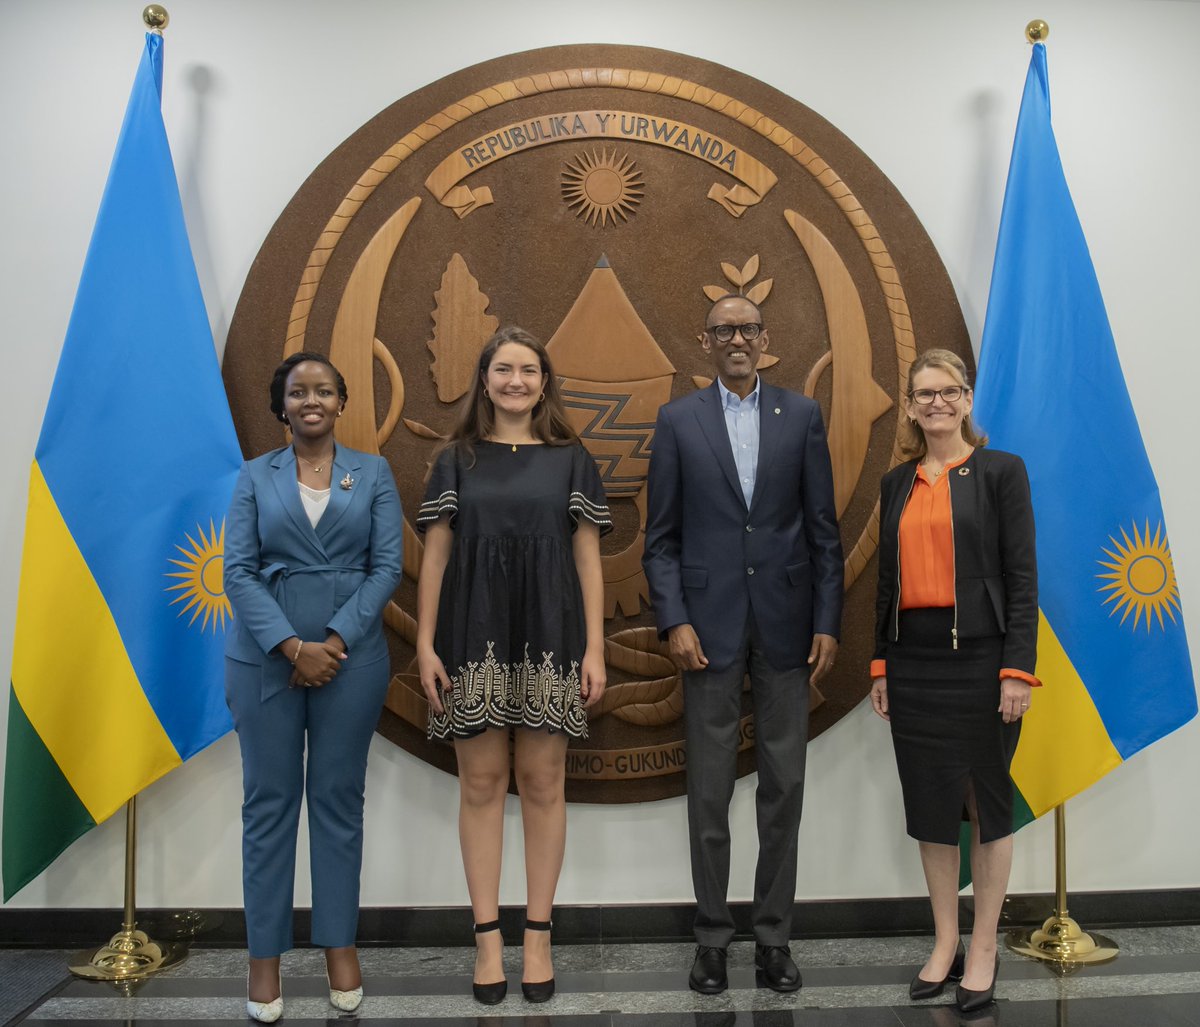 Thank you H.E.  President Kagame and Minister Ingabire for hosting the global ICT community here in Kigali where we charted a new path to connect the unconnected. #ITUWTDC #LeaveNoOneBehind